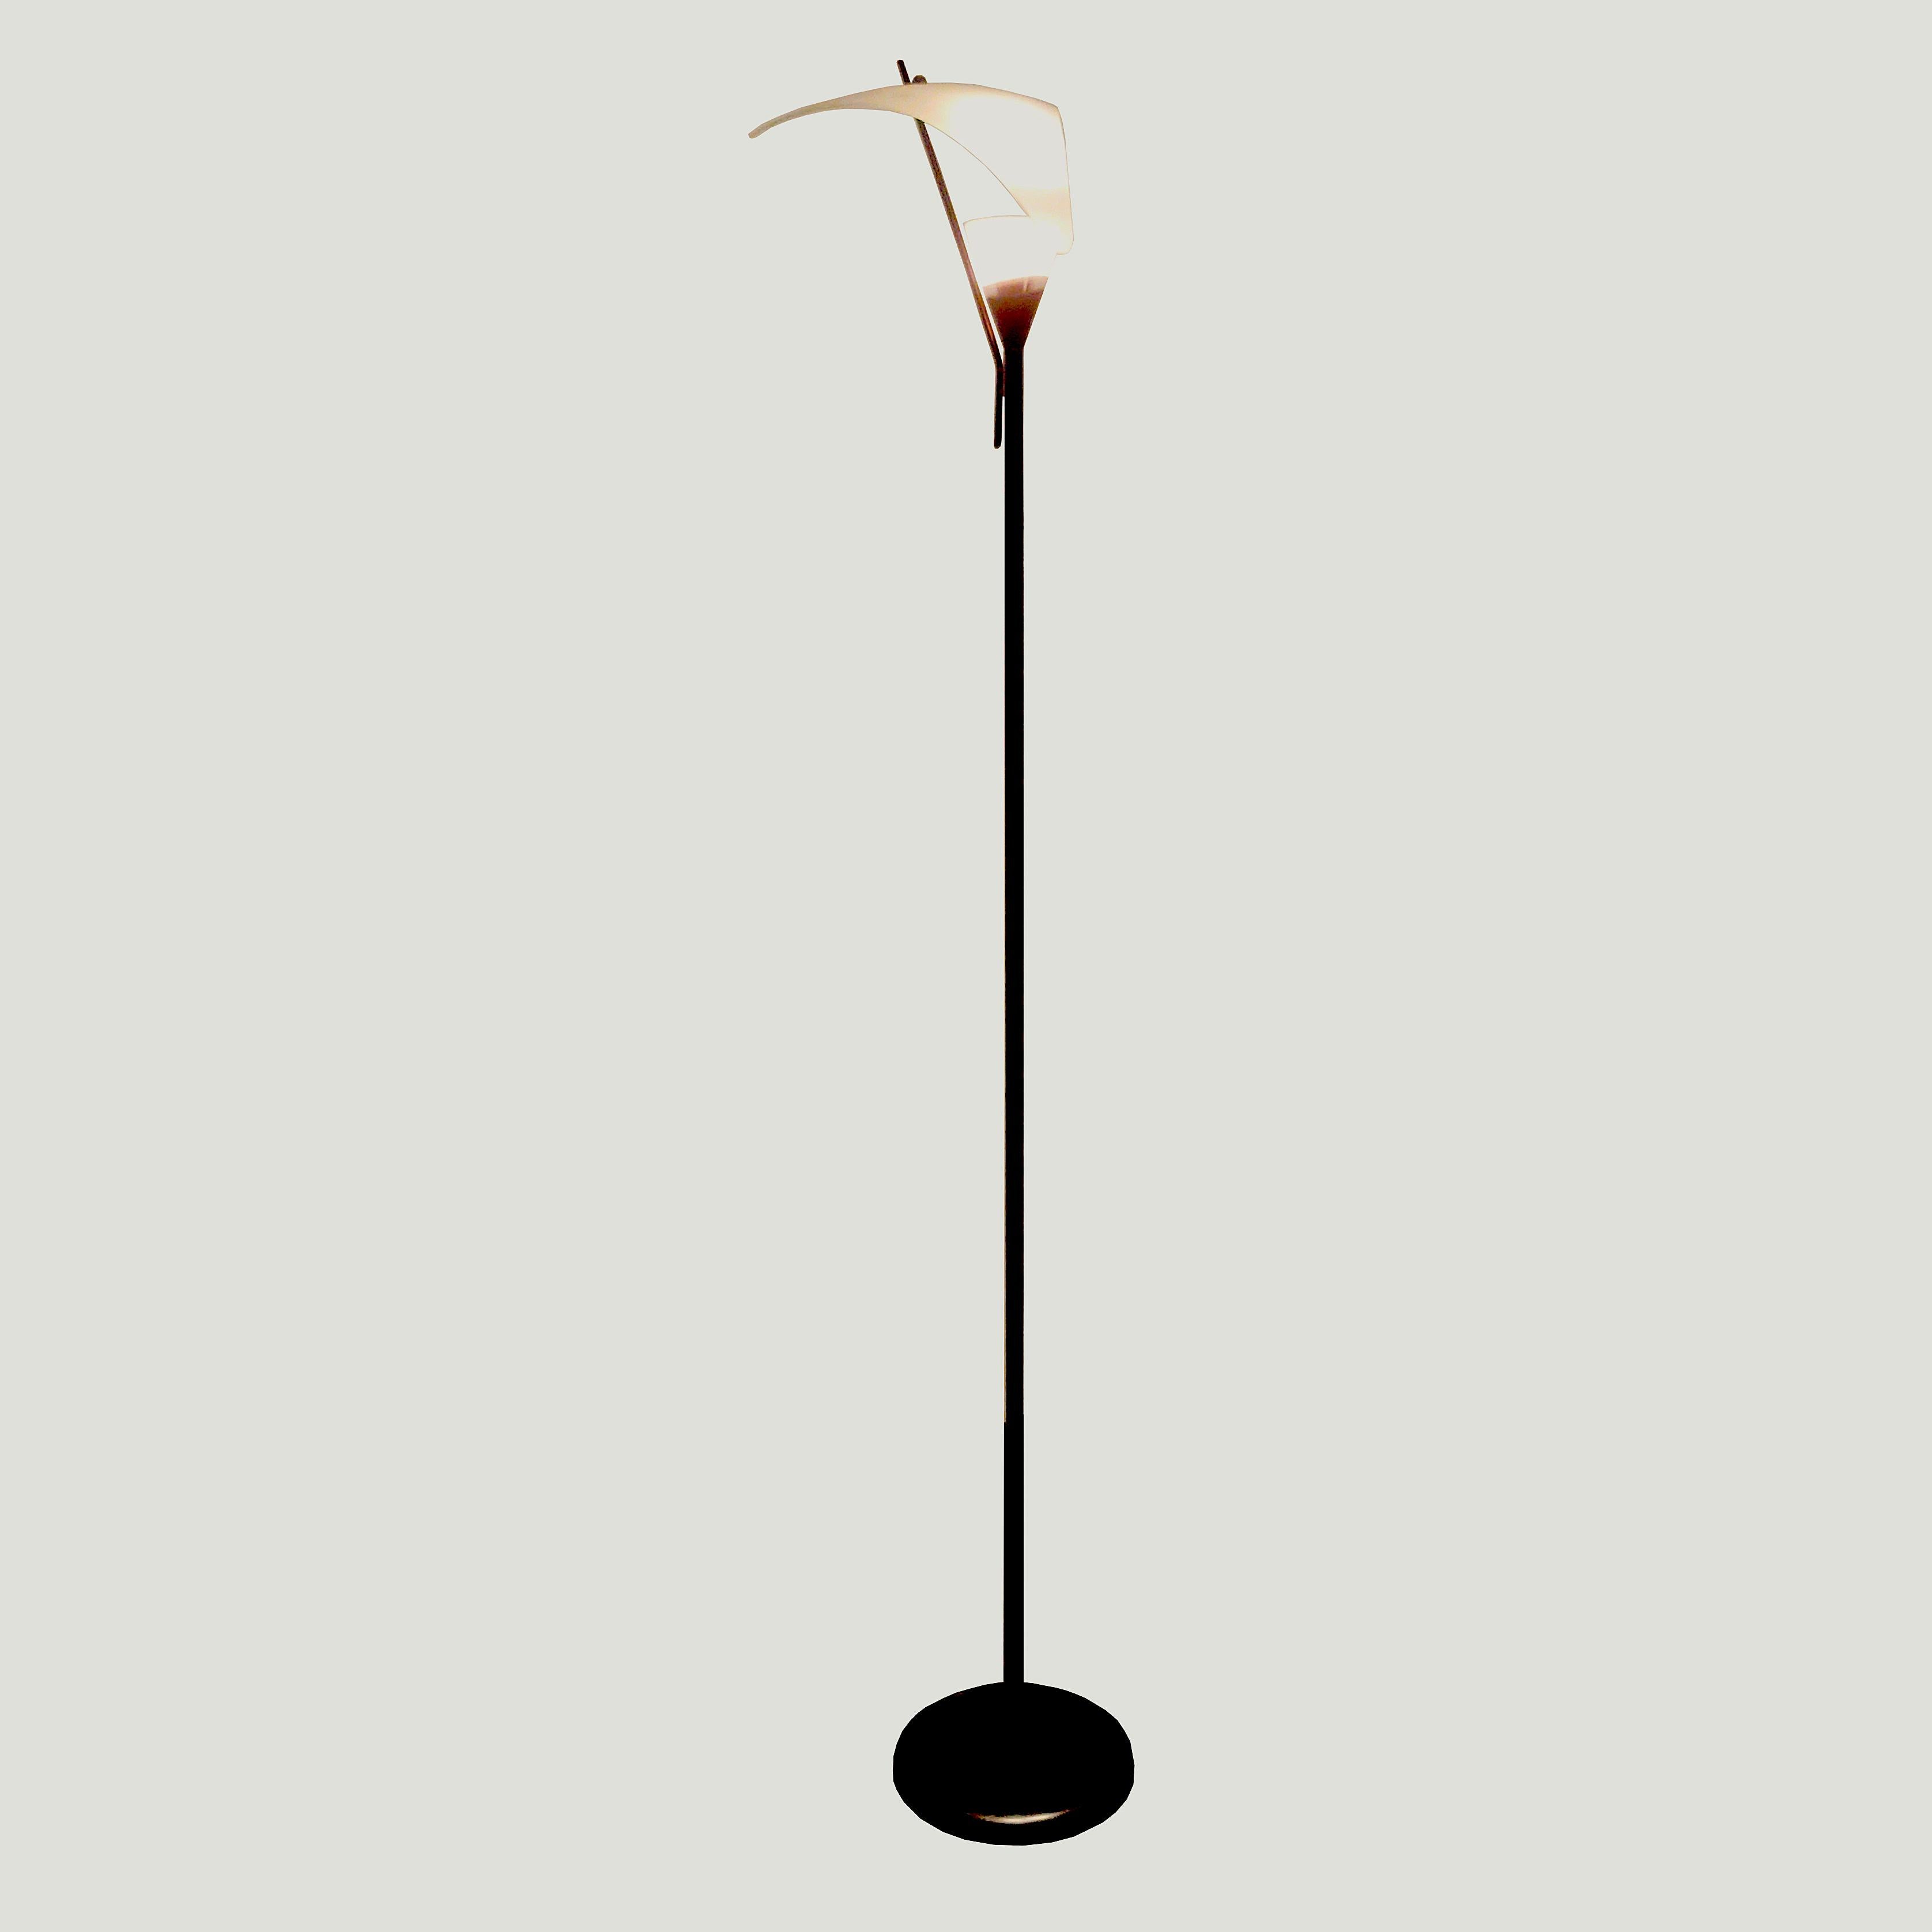 Rare Italian floating reflecting glass floor lamp, 1970s. The opaline glass shade gives the impression that it's floating above the uplighting light of the floor lamp. Uplight and covering shade are made of opaline glass stem and base are made of